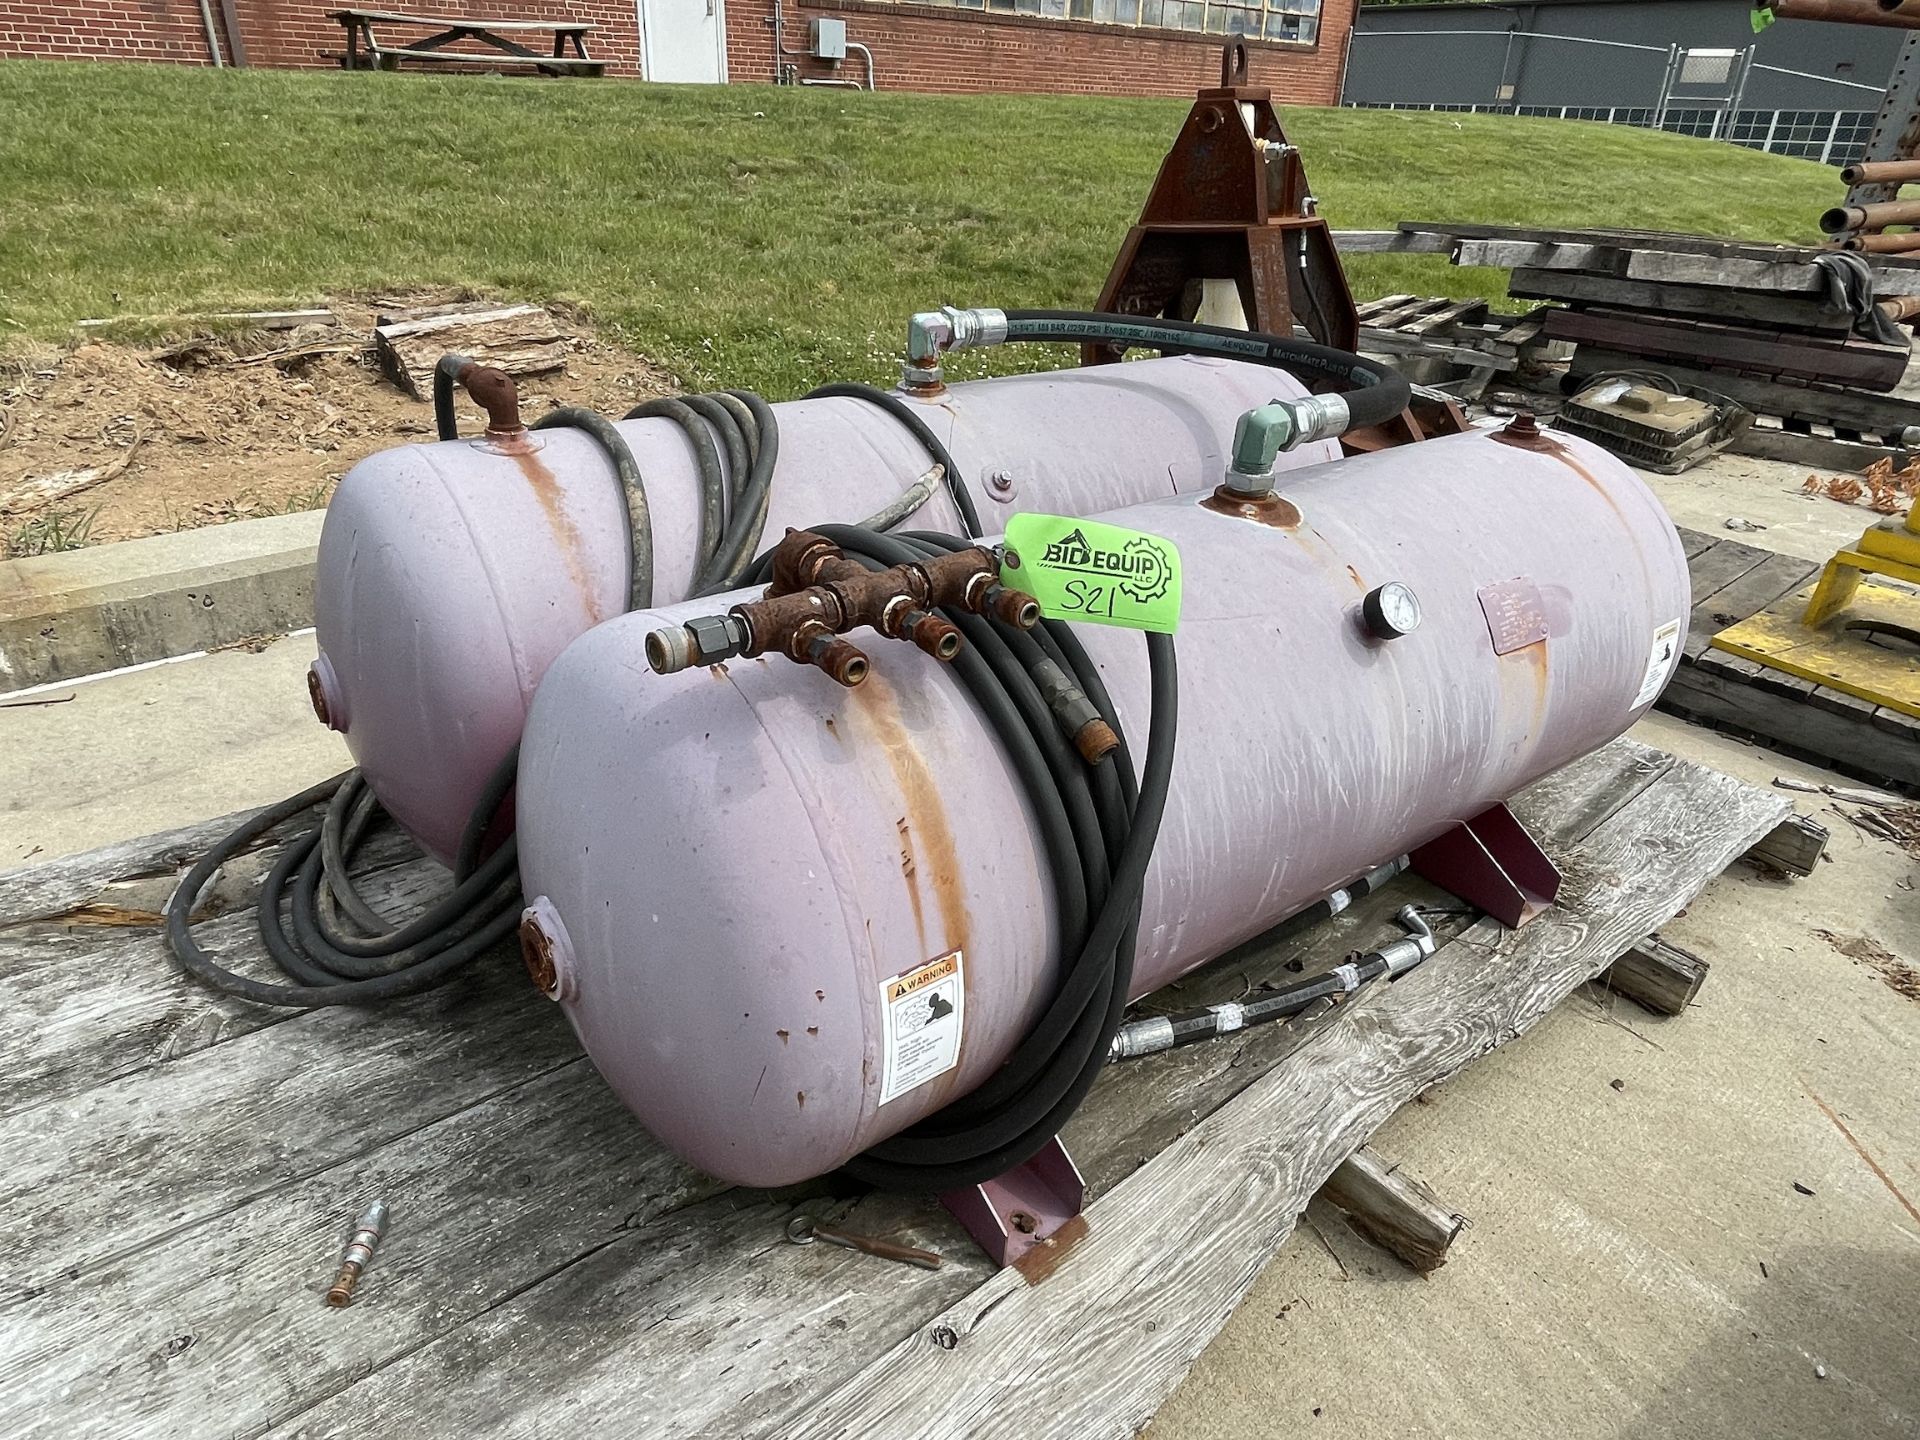 Lot of 2 Air Tanks (S21) - West Chester - Image 3 of 7